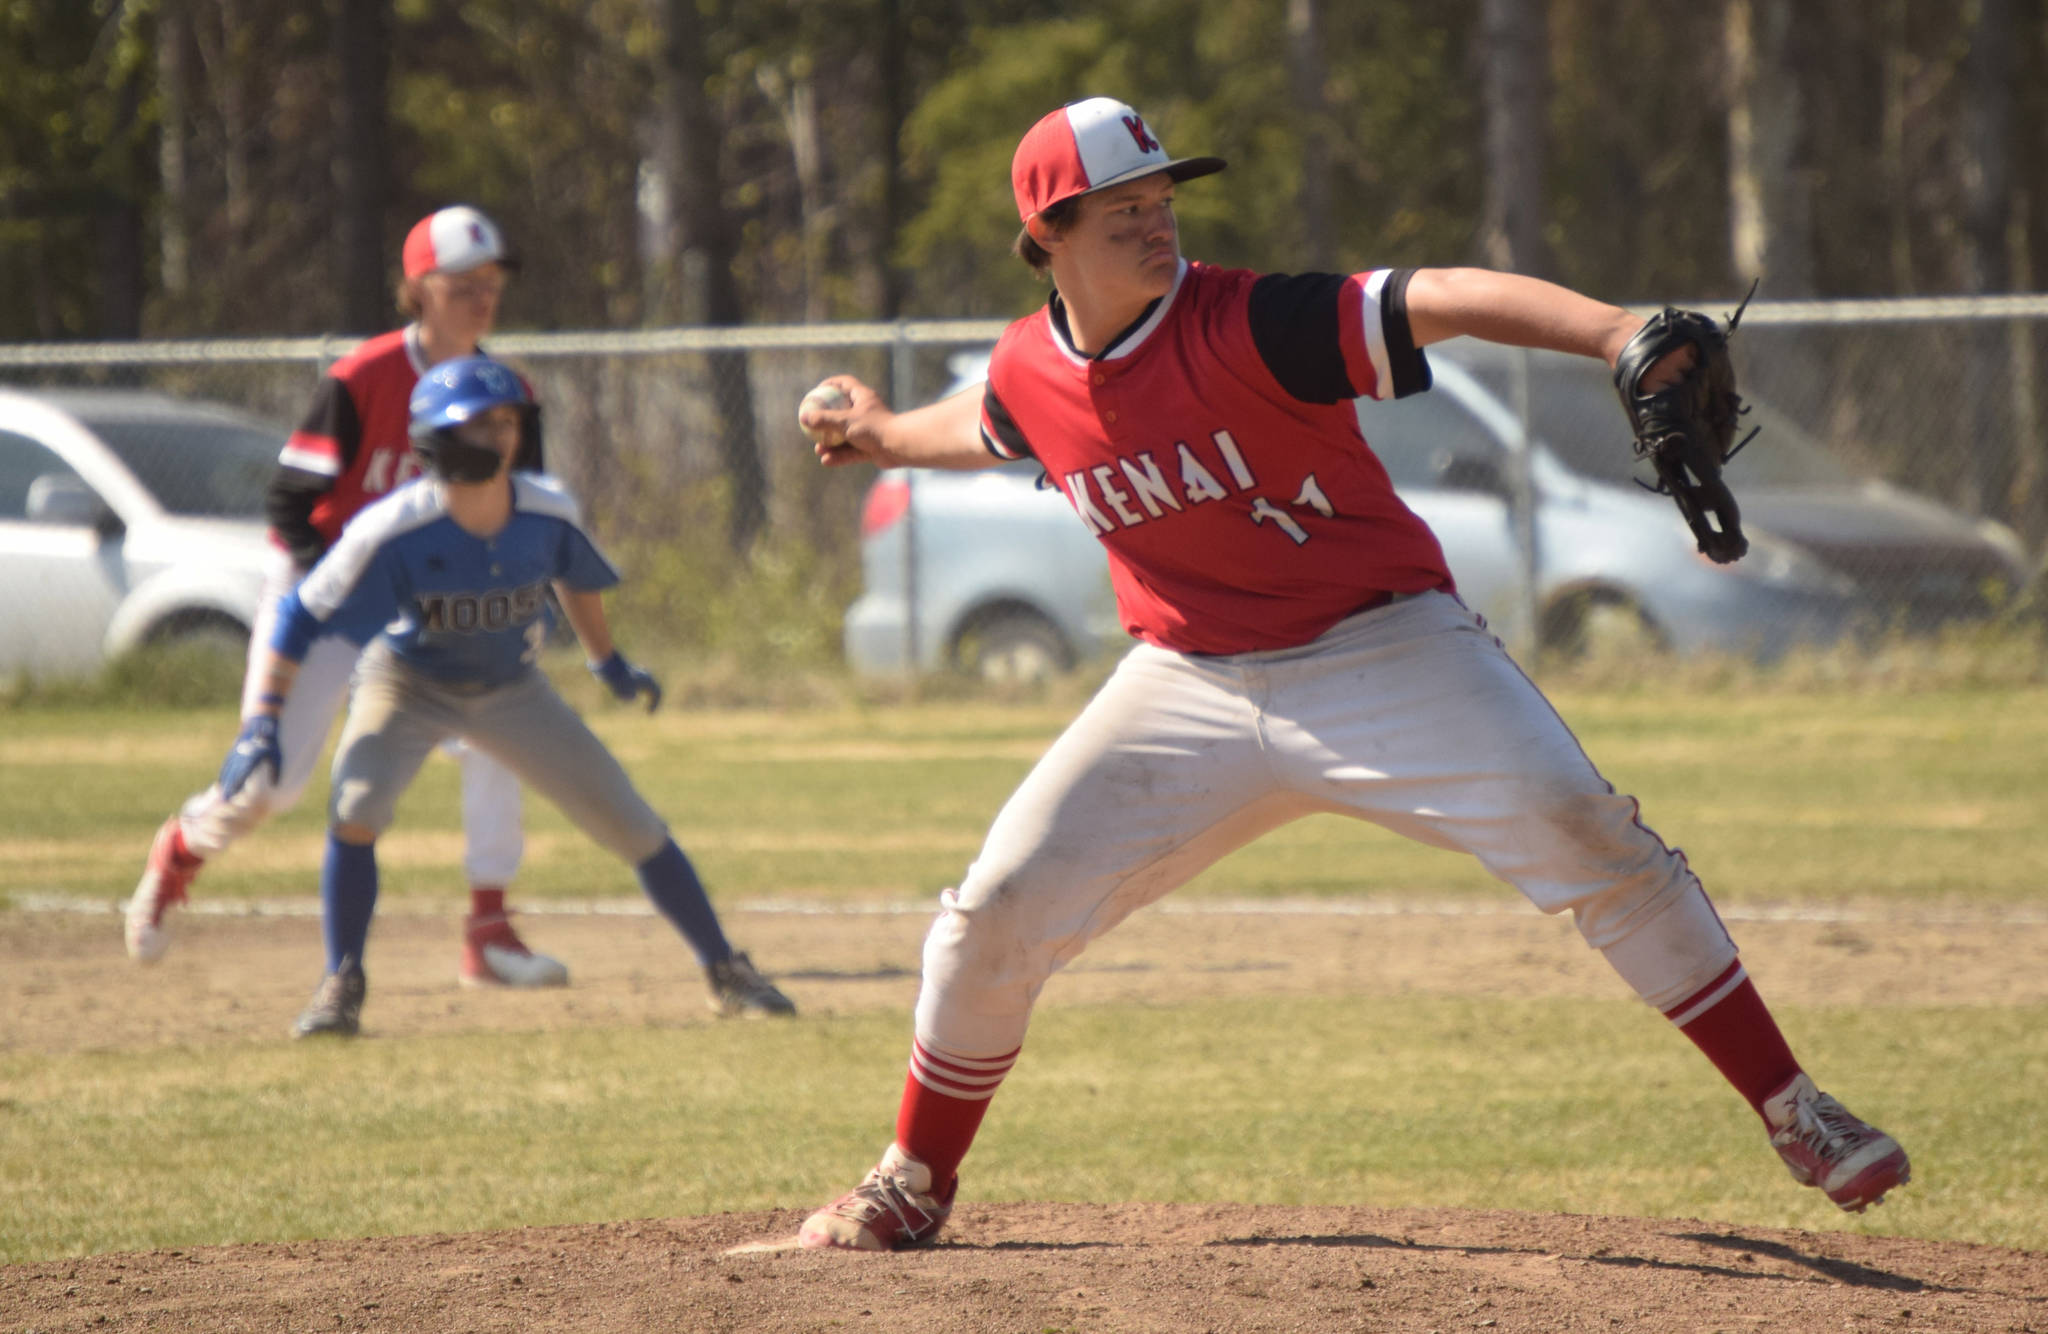 Kenai pitcher Gabe Smith delivers to Palmer on Thursday, May 27, 2021, at the Southcentral Conference tournament at the Soldotna Little League fields in Soldotna, Alaska. (Photo by Jeff Helminiak/Peninsula Clarion)